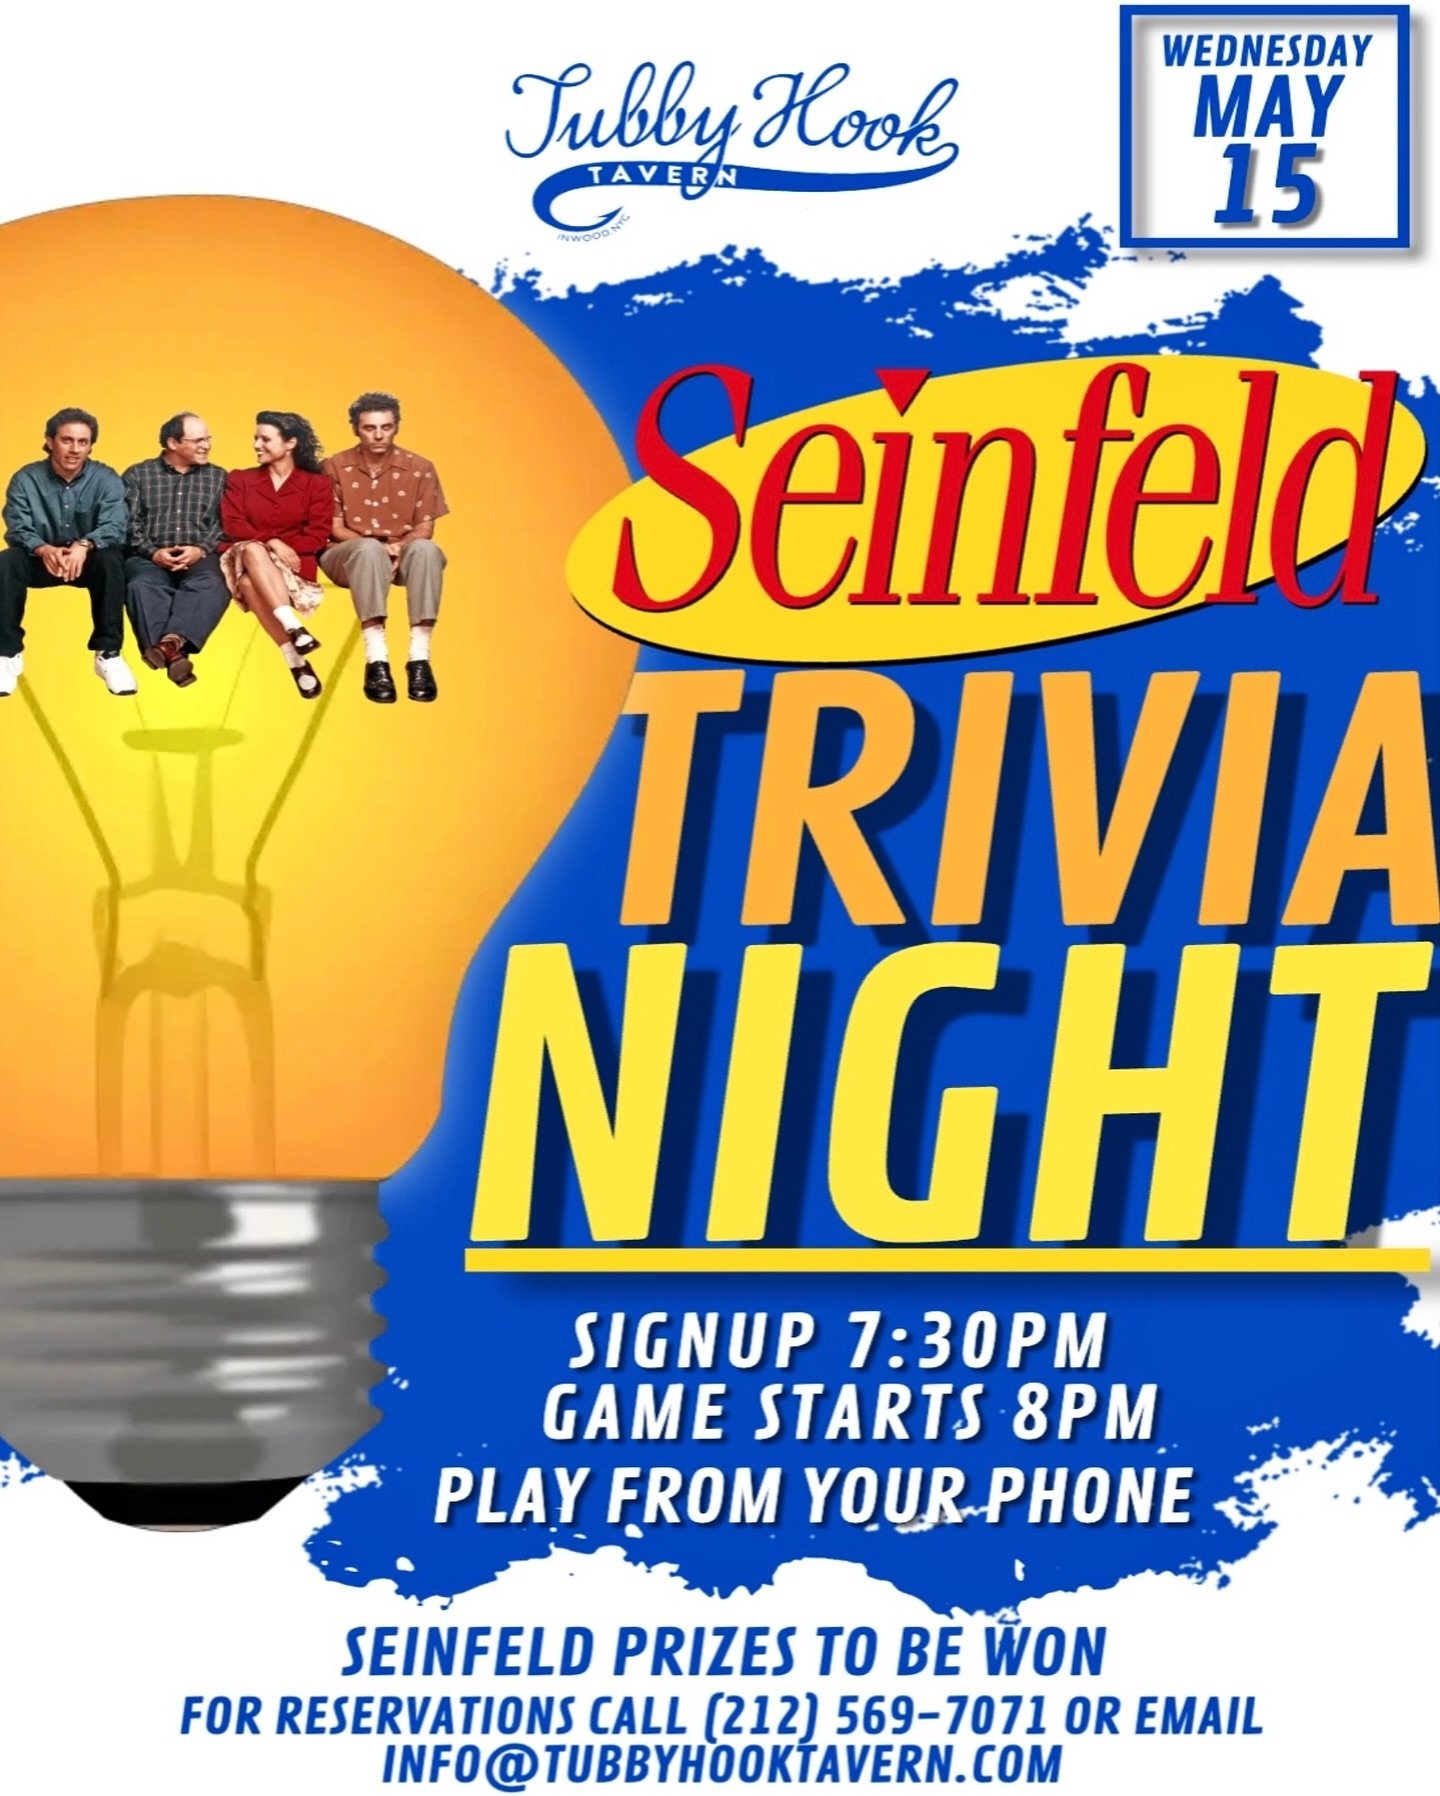 🍻🍴 Get ready for a night of laughter and nostalgia at our Seinfeld Trivia Night happening on May 15th at 8:00 PM! 🎉🎉

🍽️🎊 We&rsquo;re turning Tubby Hook into a Seinfeld wonderland for all you fans out there. Test your knowledge about the show a